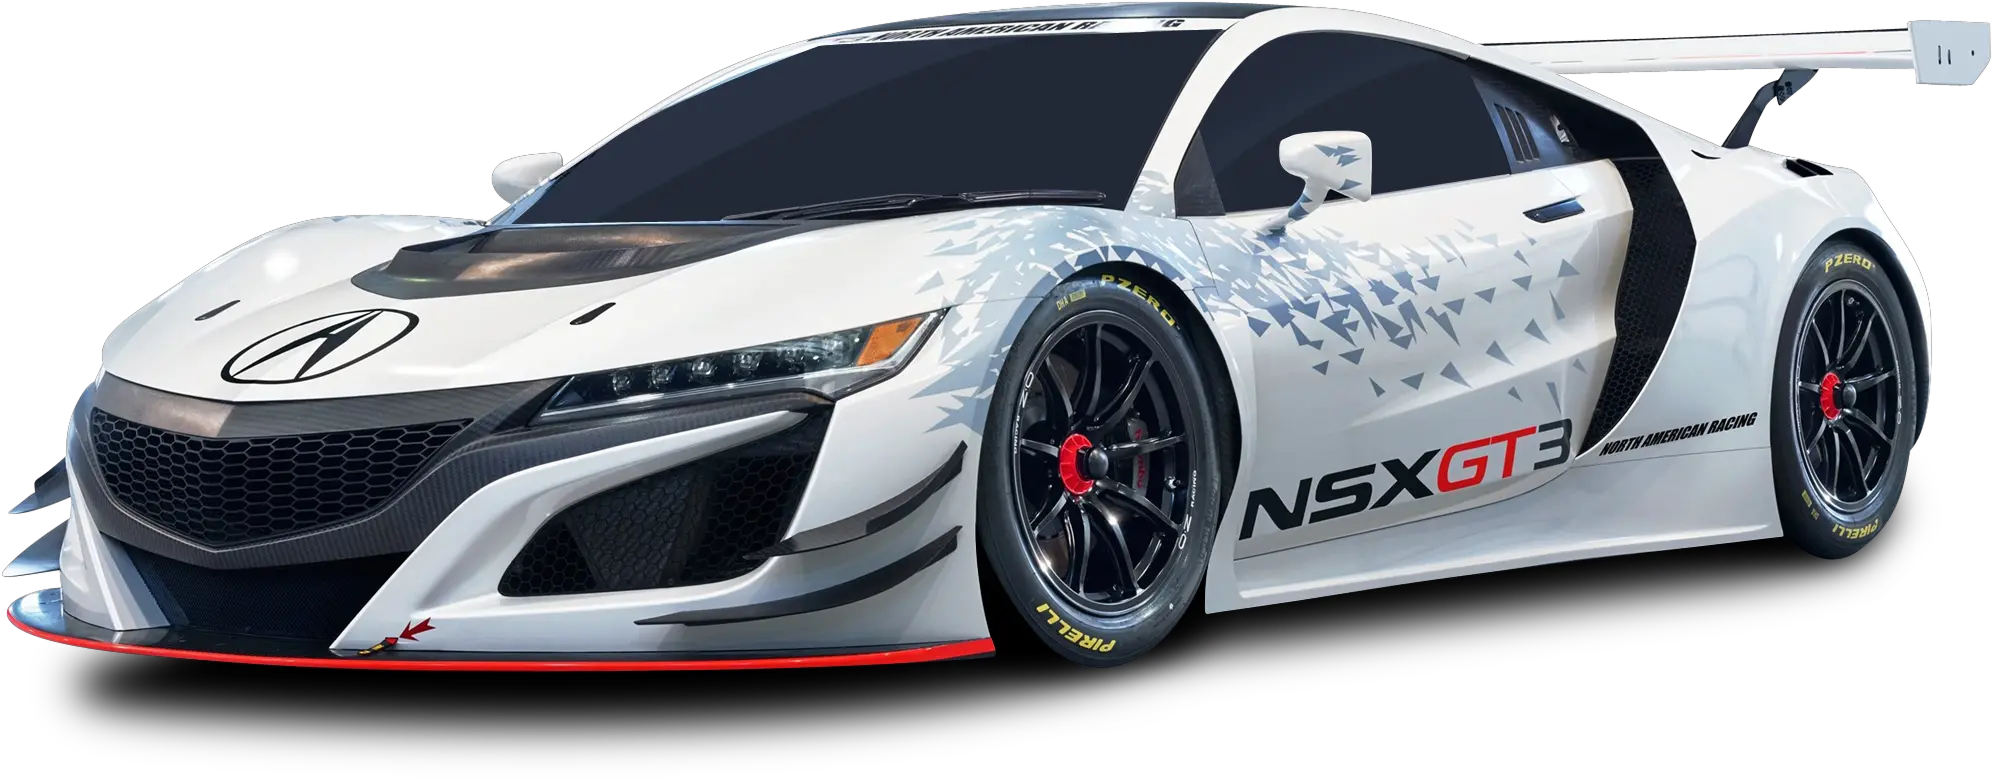 Acura Nsx Gt3 Racing White Car Png Acura Nsx Gt3 2016 Race Car Png